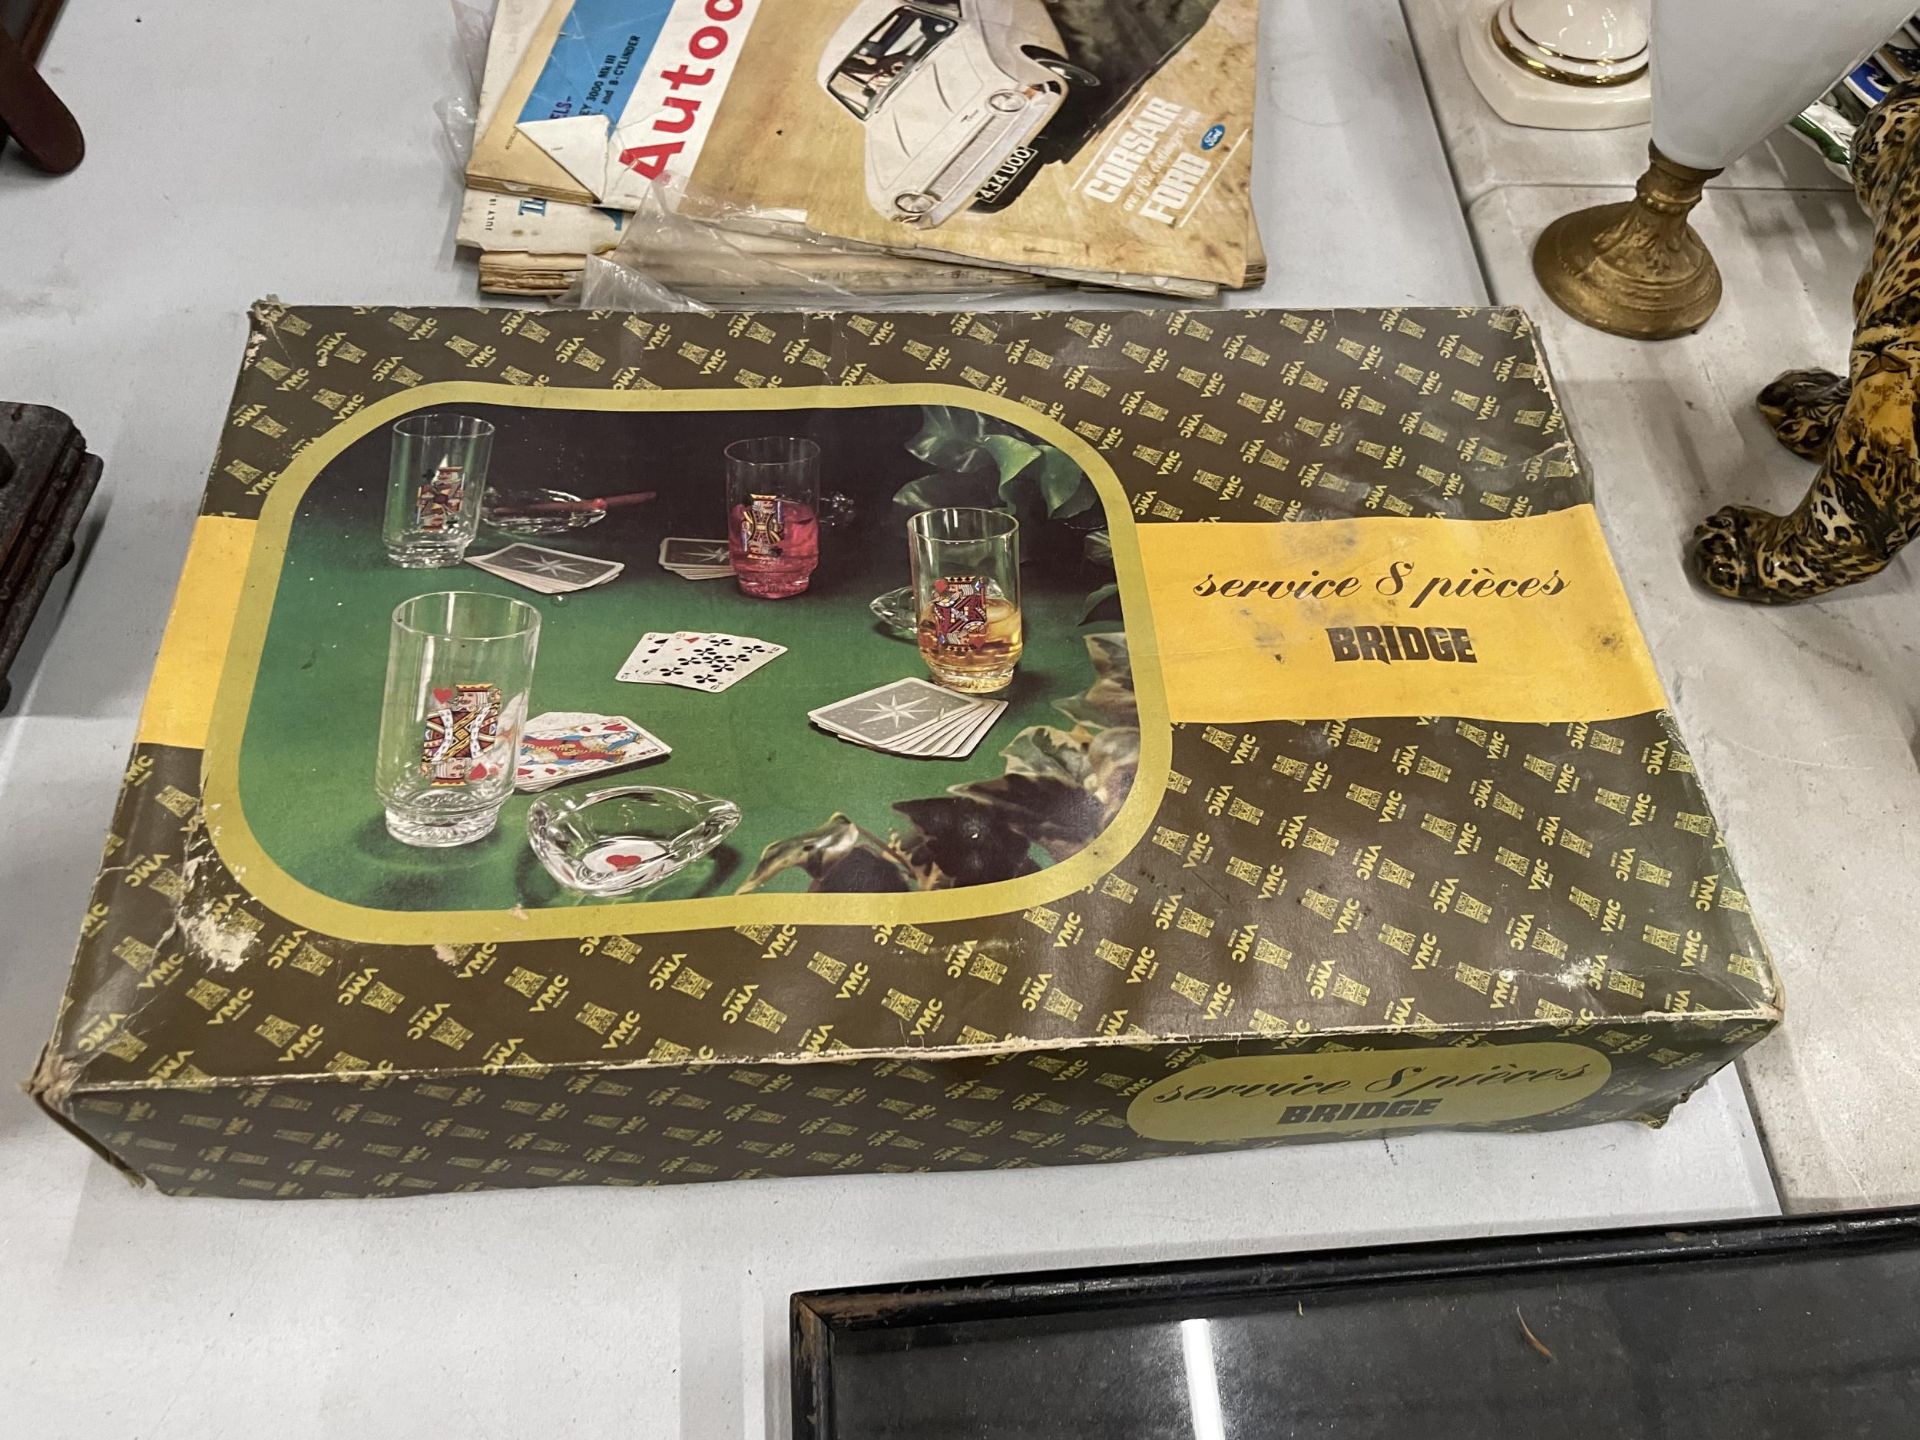 A BOXED VINTAGE SET OF 'BRIDGE' GLASSWARE TO INCLUDE PLAYING CARD THEMED TUMBLERS AND ASHTRAYS - Image 3 of 3